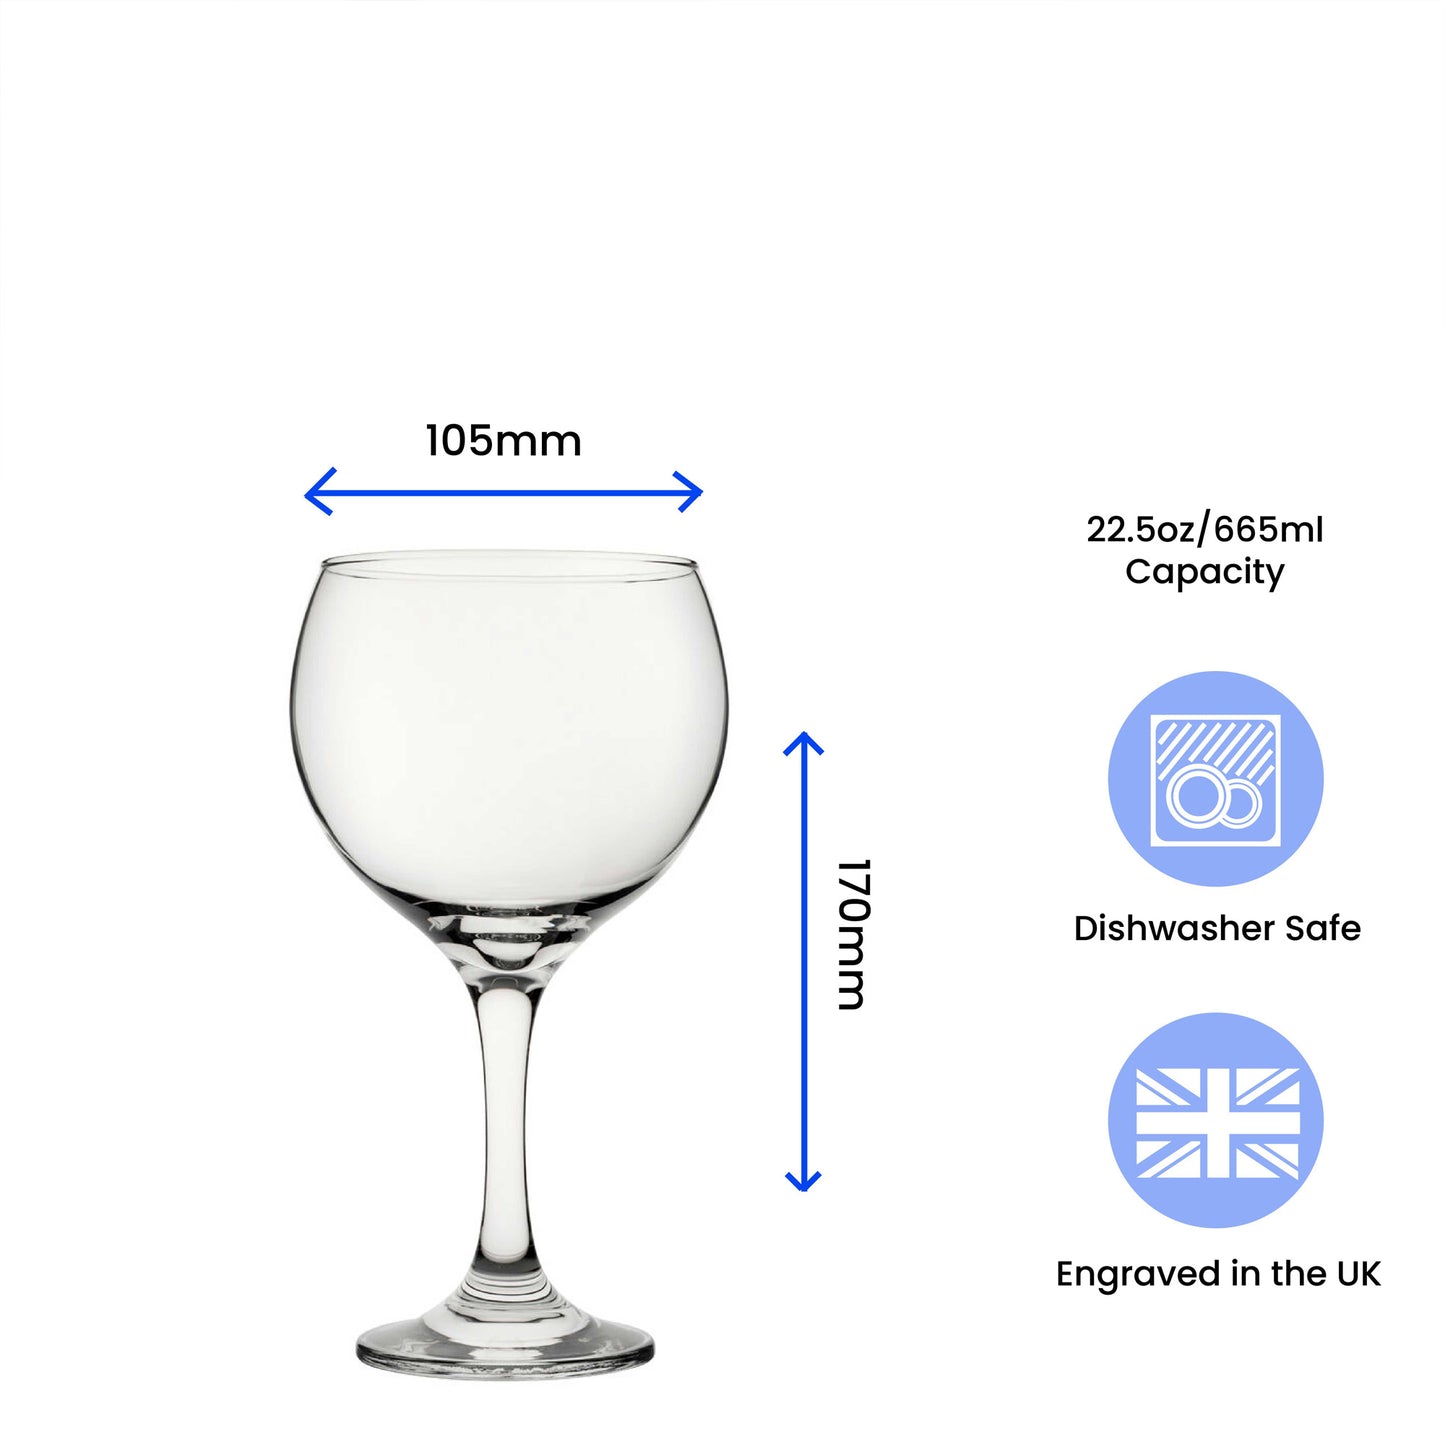 Got To Be In It To Gin It - Engraved Novelty Gin Balloon Cocktail  Glass Image 3